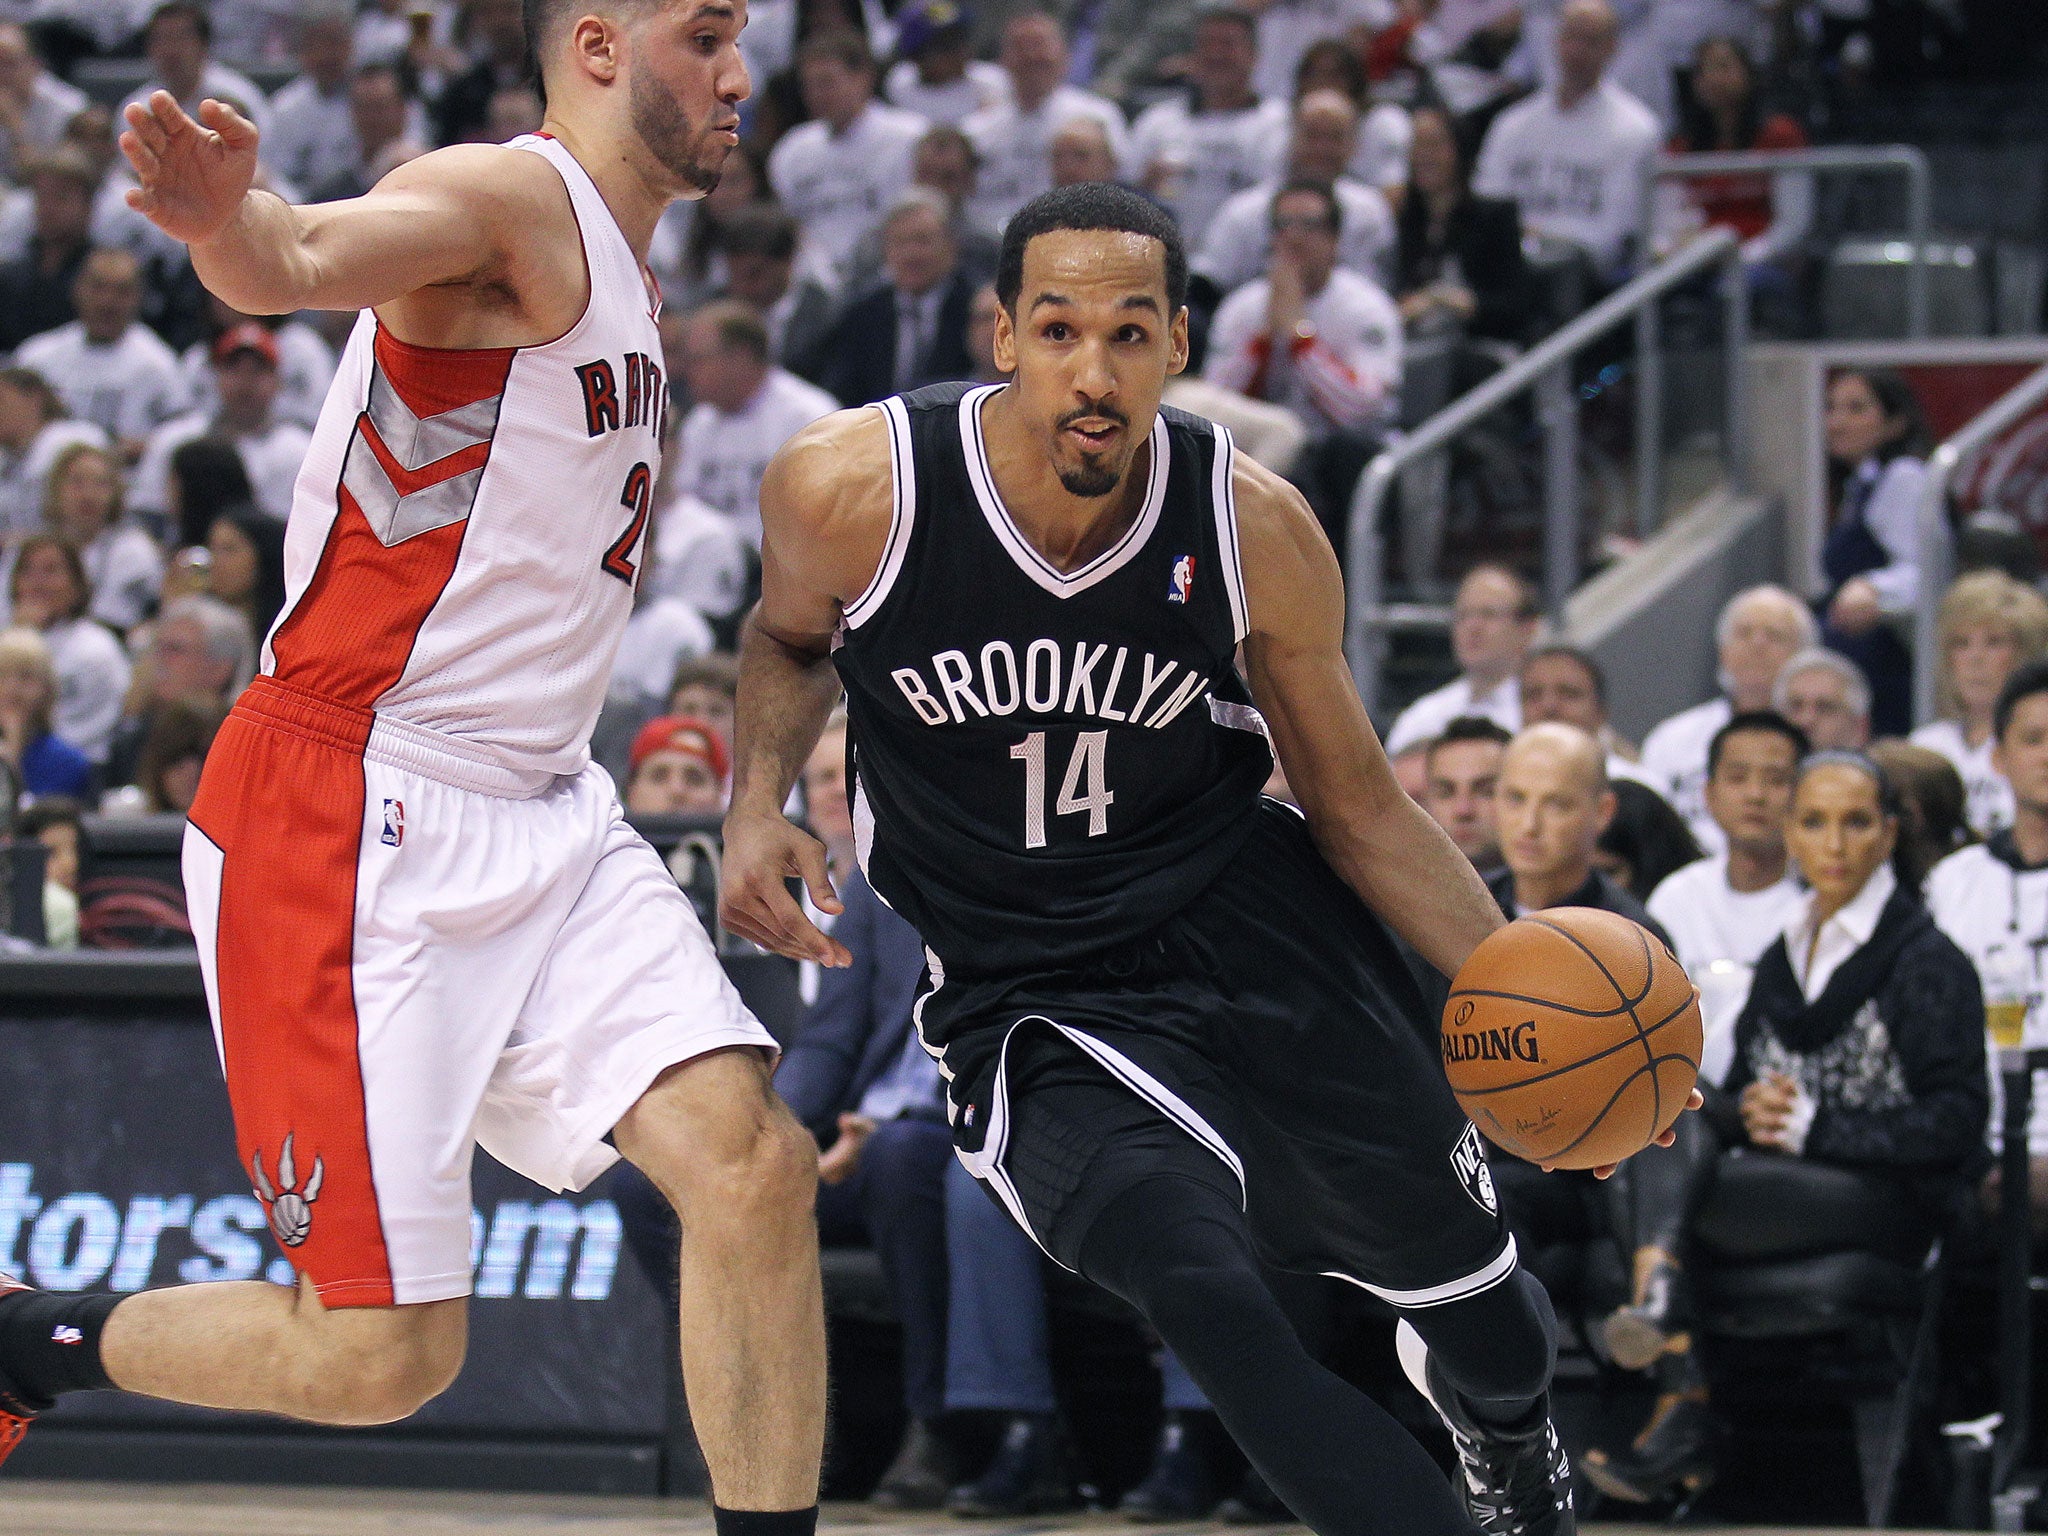 Shaun Livingston has signed a three-year $16m deal with the Golden State Warriors